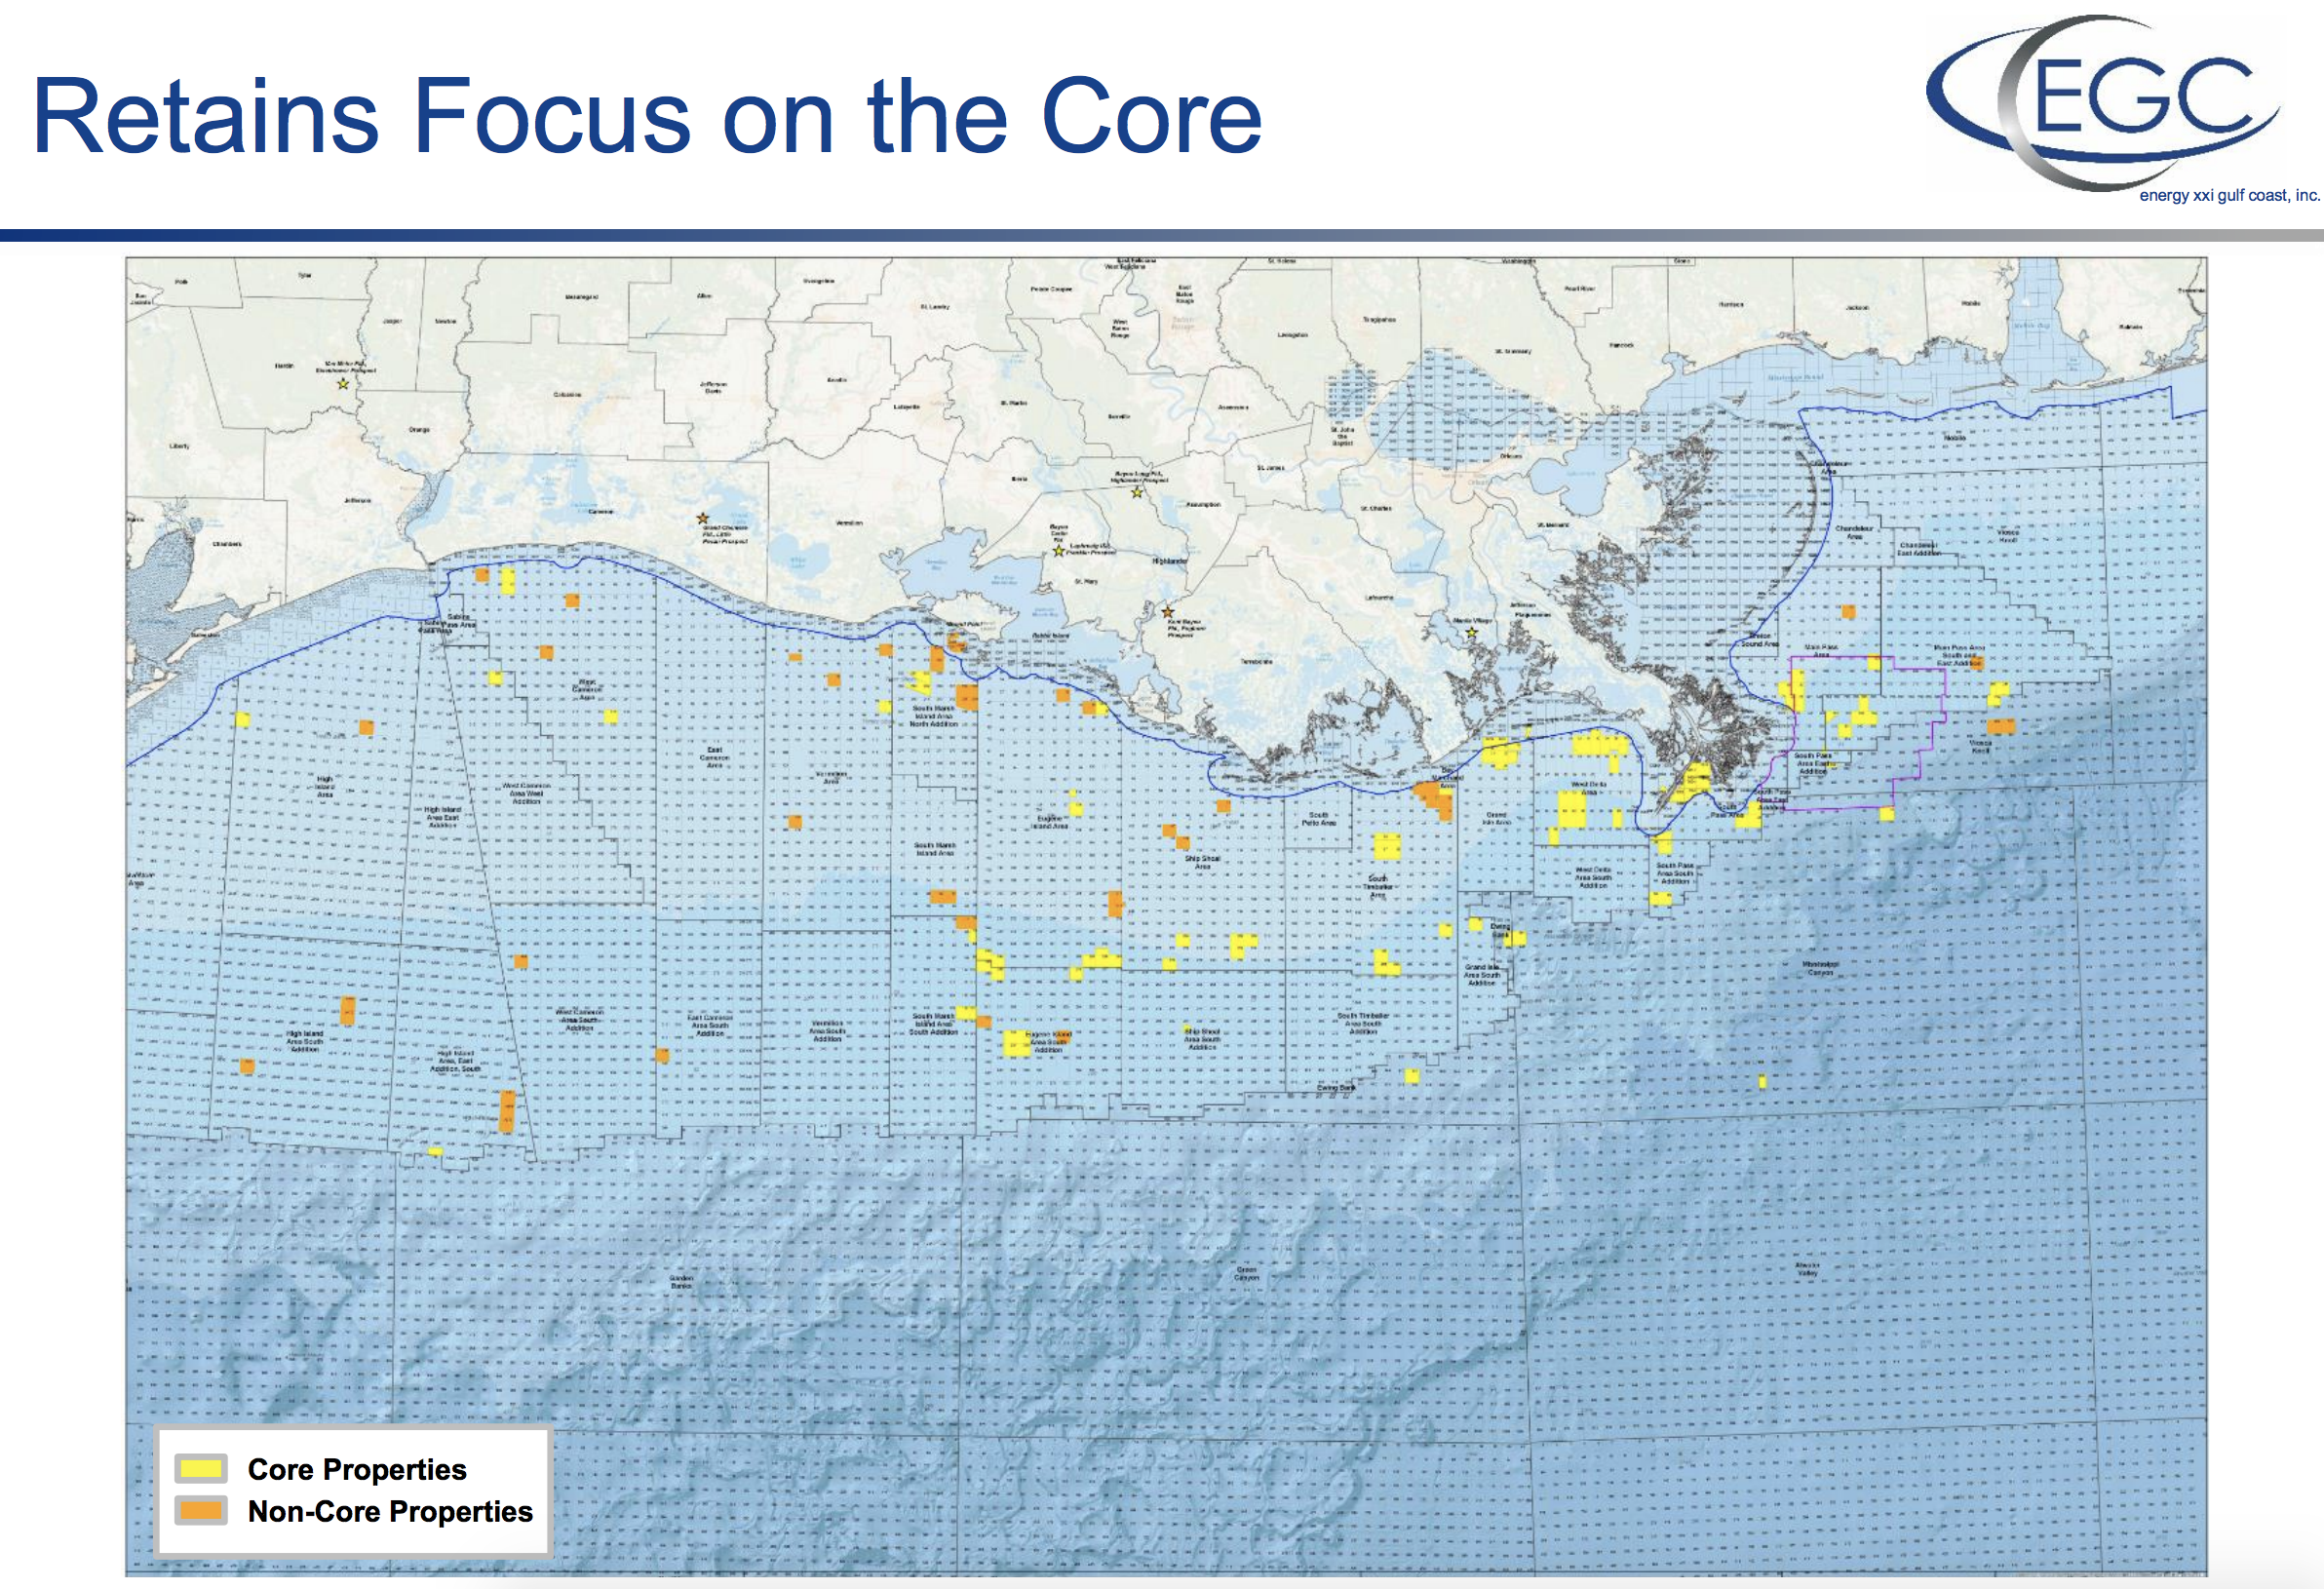 Energy XXI - Retain Focus On The Core (Source: Energy XXI First-Quarter Earnings Call Presentation)